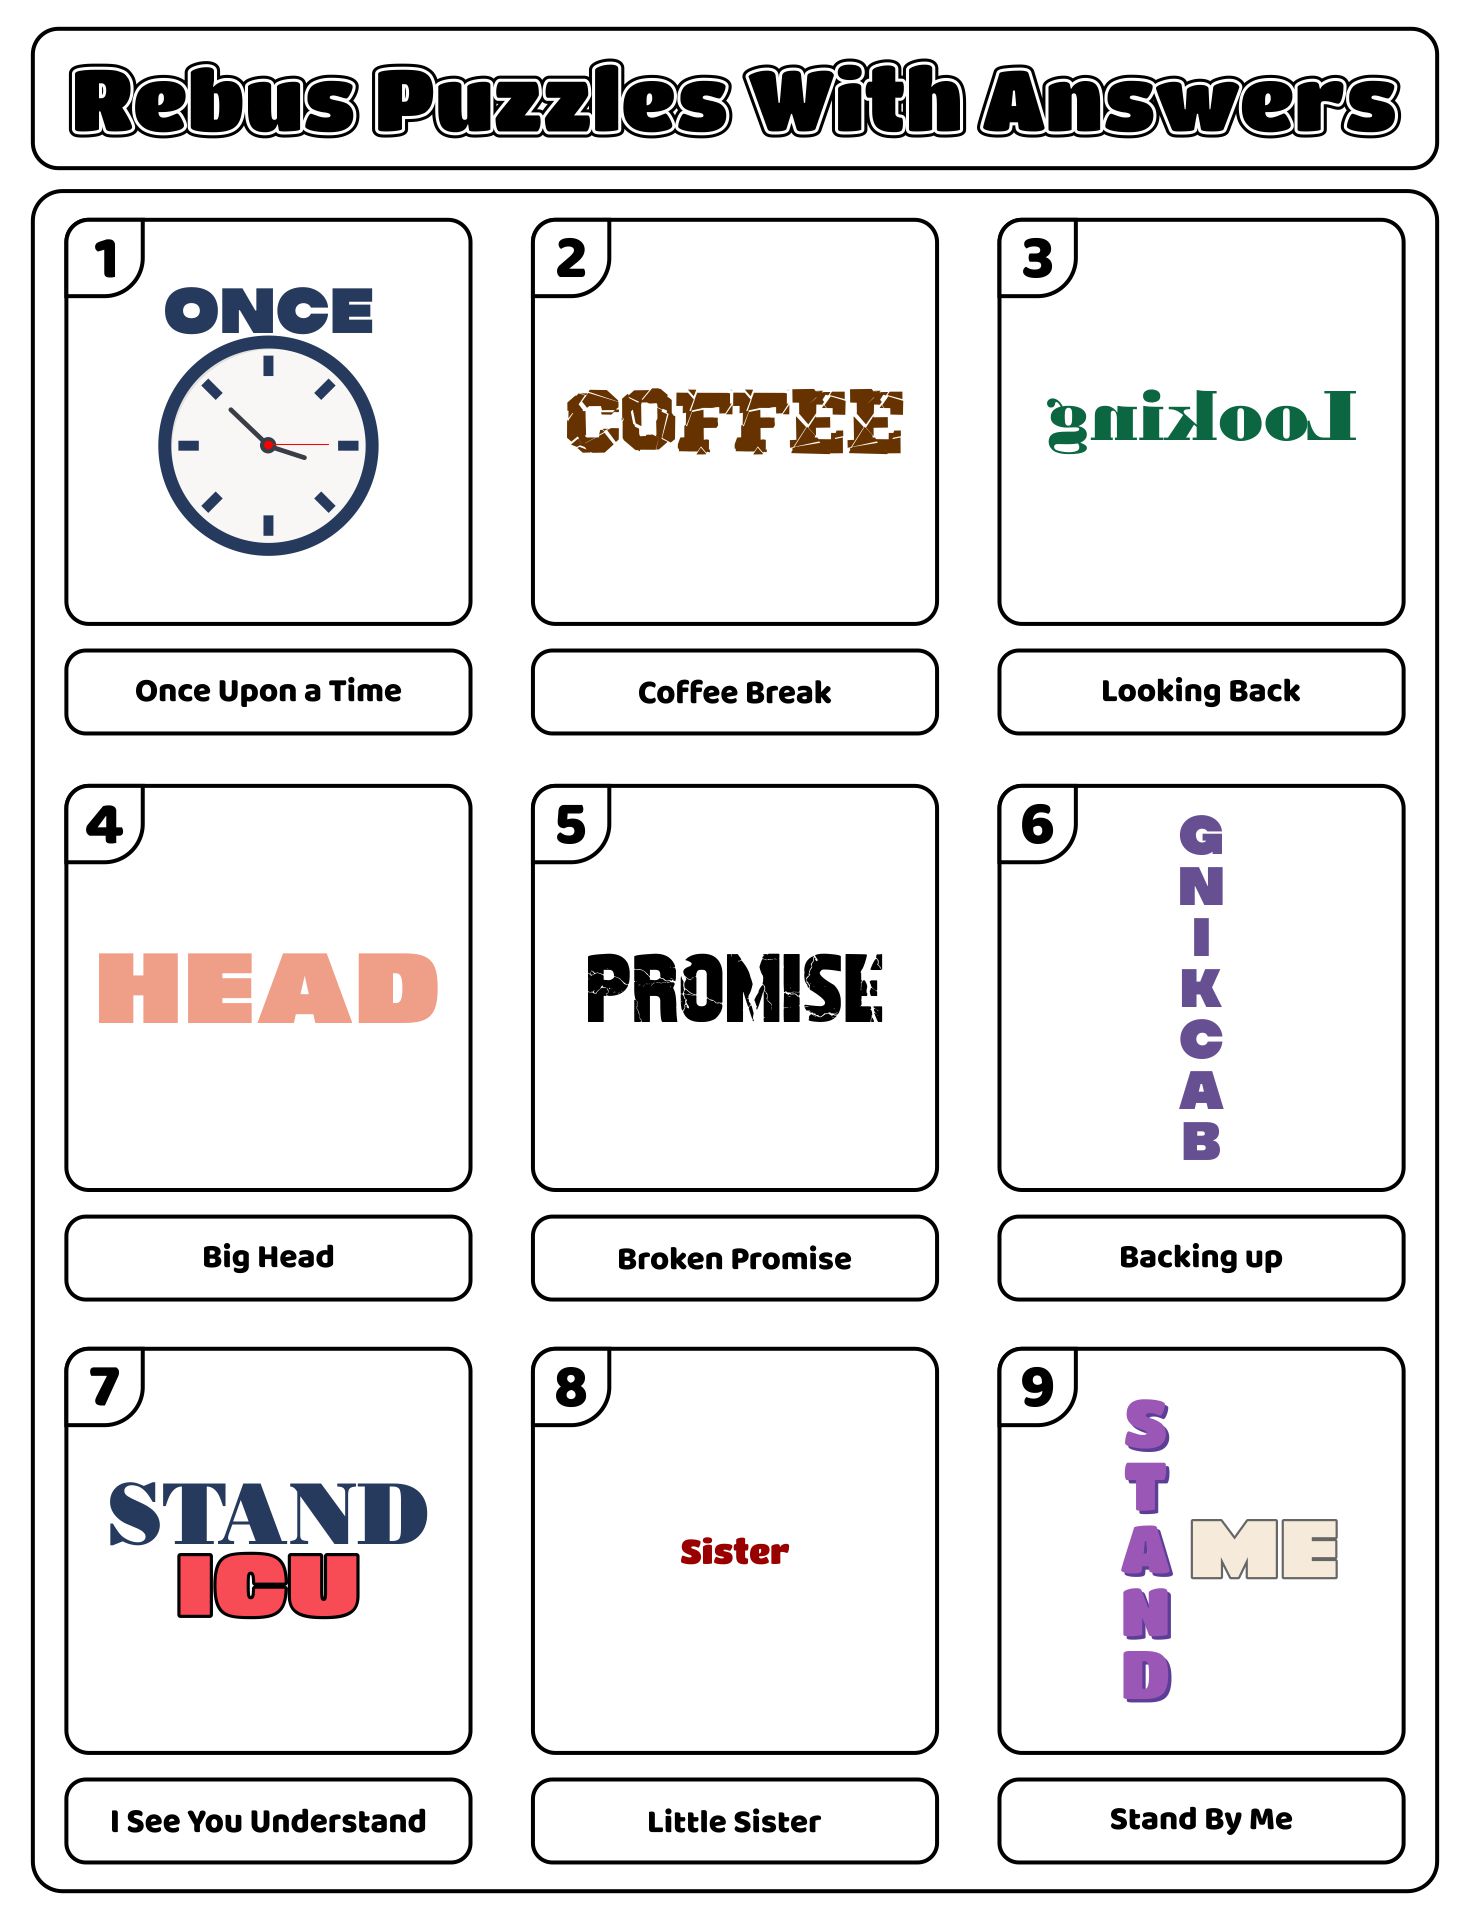 7 Best Images of Printable Rebus Puzzles With Answers  Rebus Puzzle Answers, Free Printable 